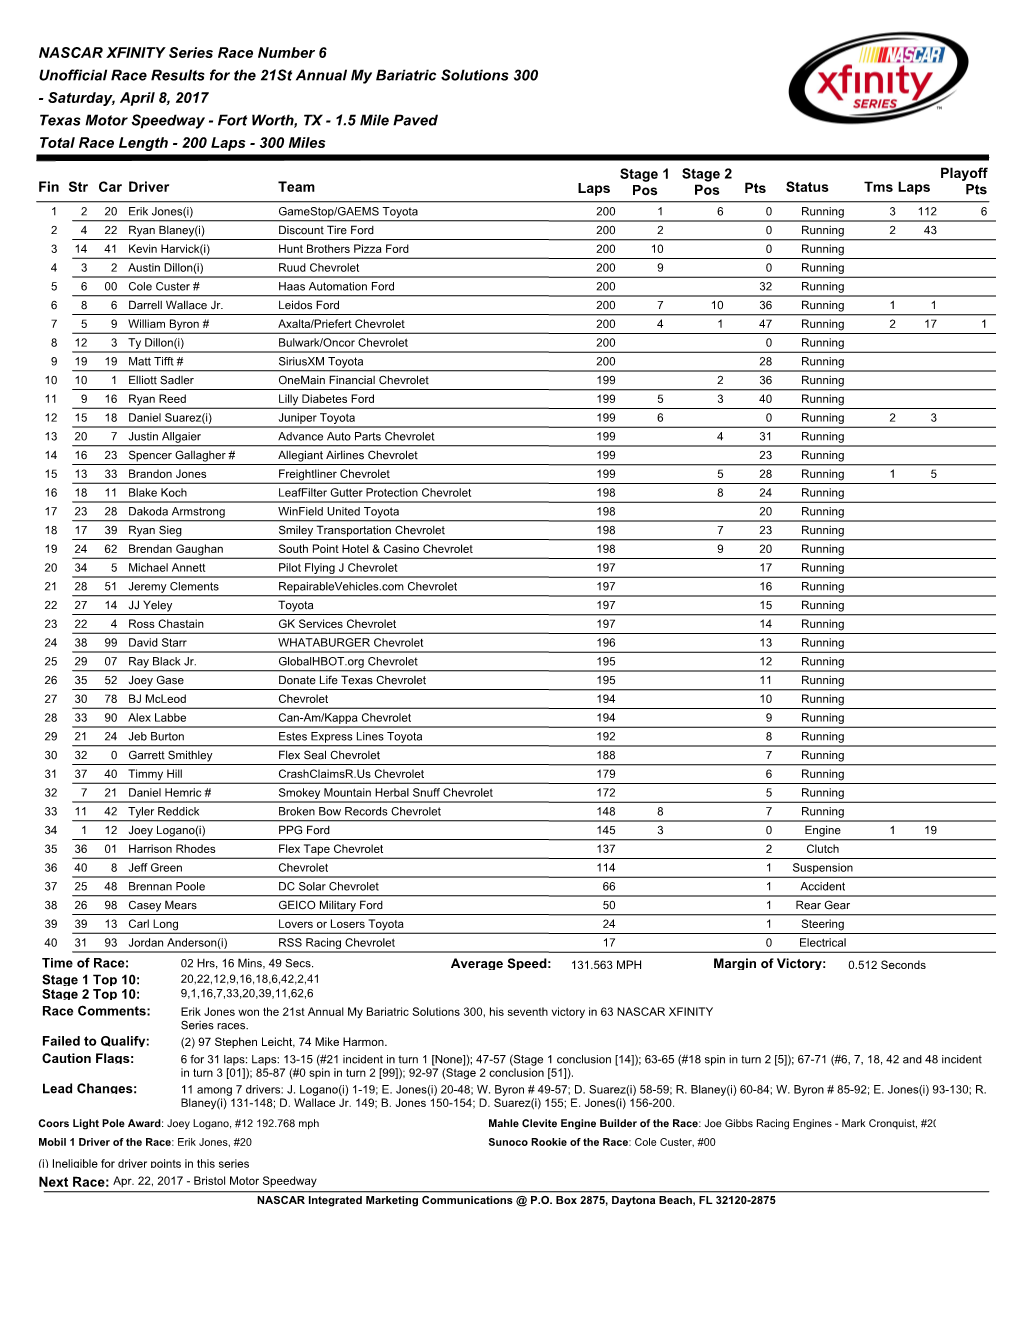 NASCAR XFINITY Series Race Number 6 Unofficial Race Results